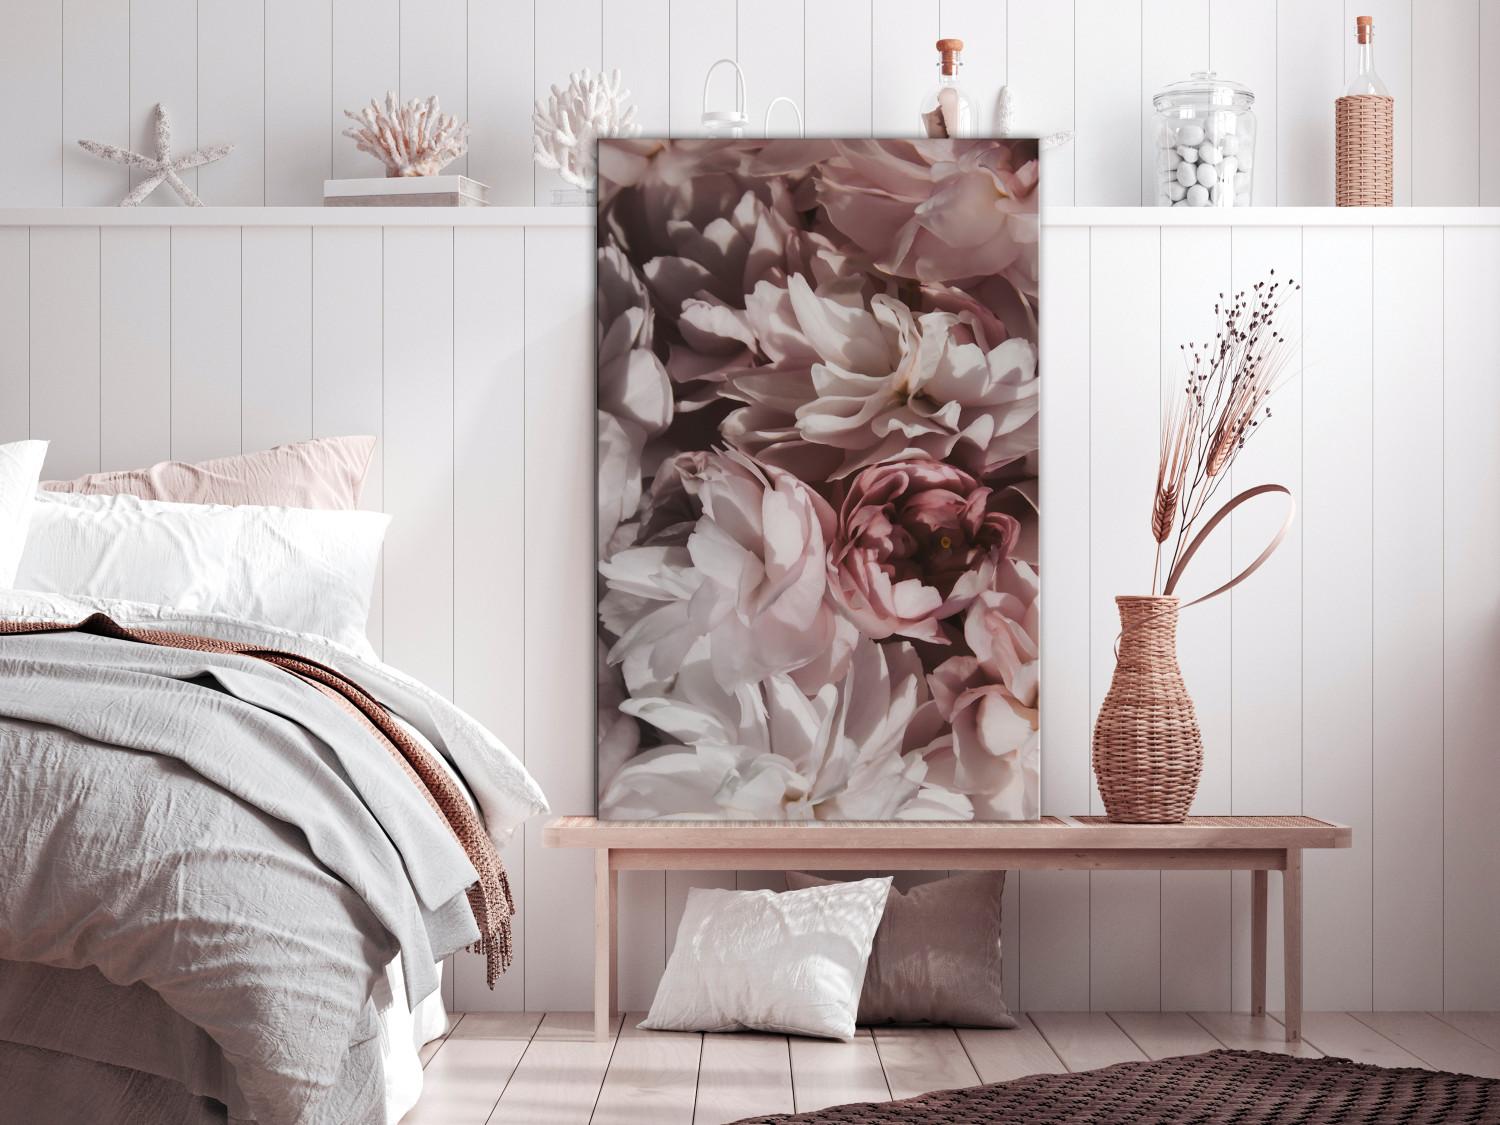 Canvas Flowers in the shade - Pastel Floral composition in Boho Style